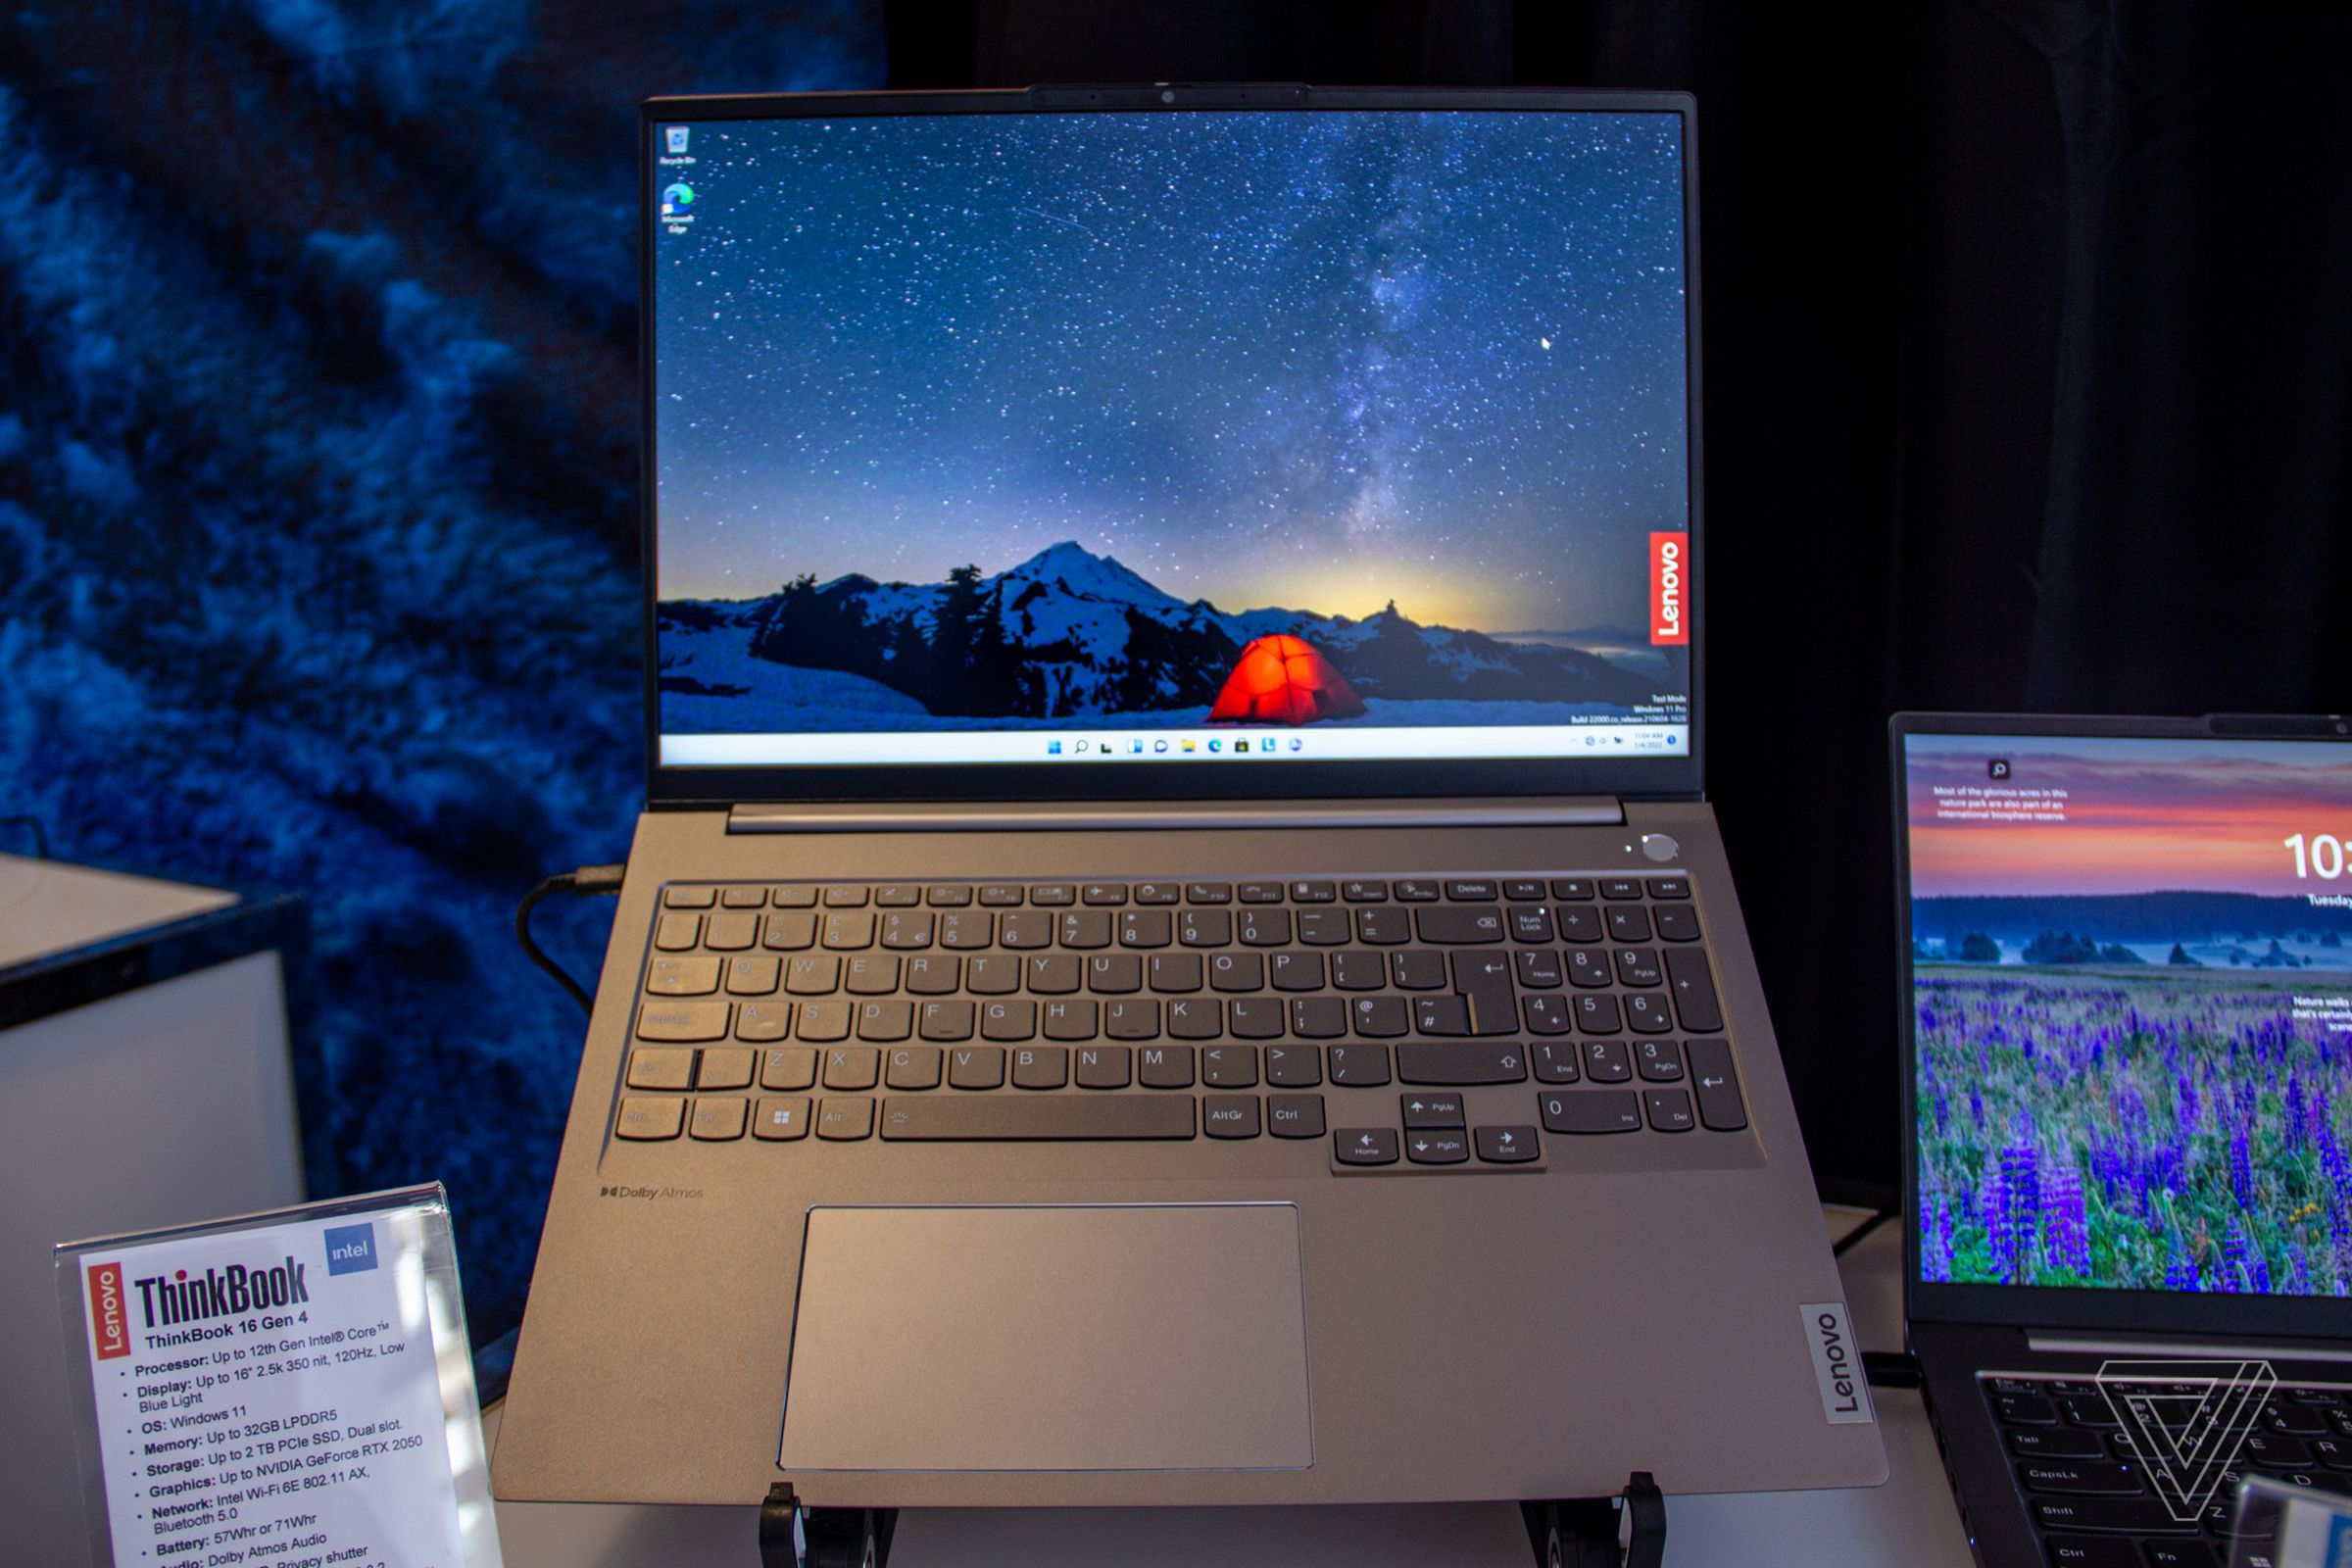 The Lenovo ThinkBook 16 Gen 4 on an angled stand, open. The screen displays a night outdoor scene with a small red tent in the center and the Lenovo logo on the right side.